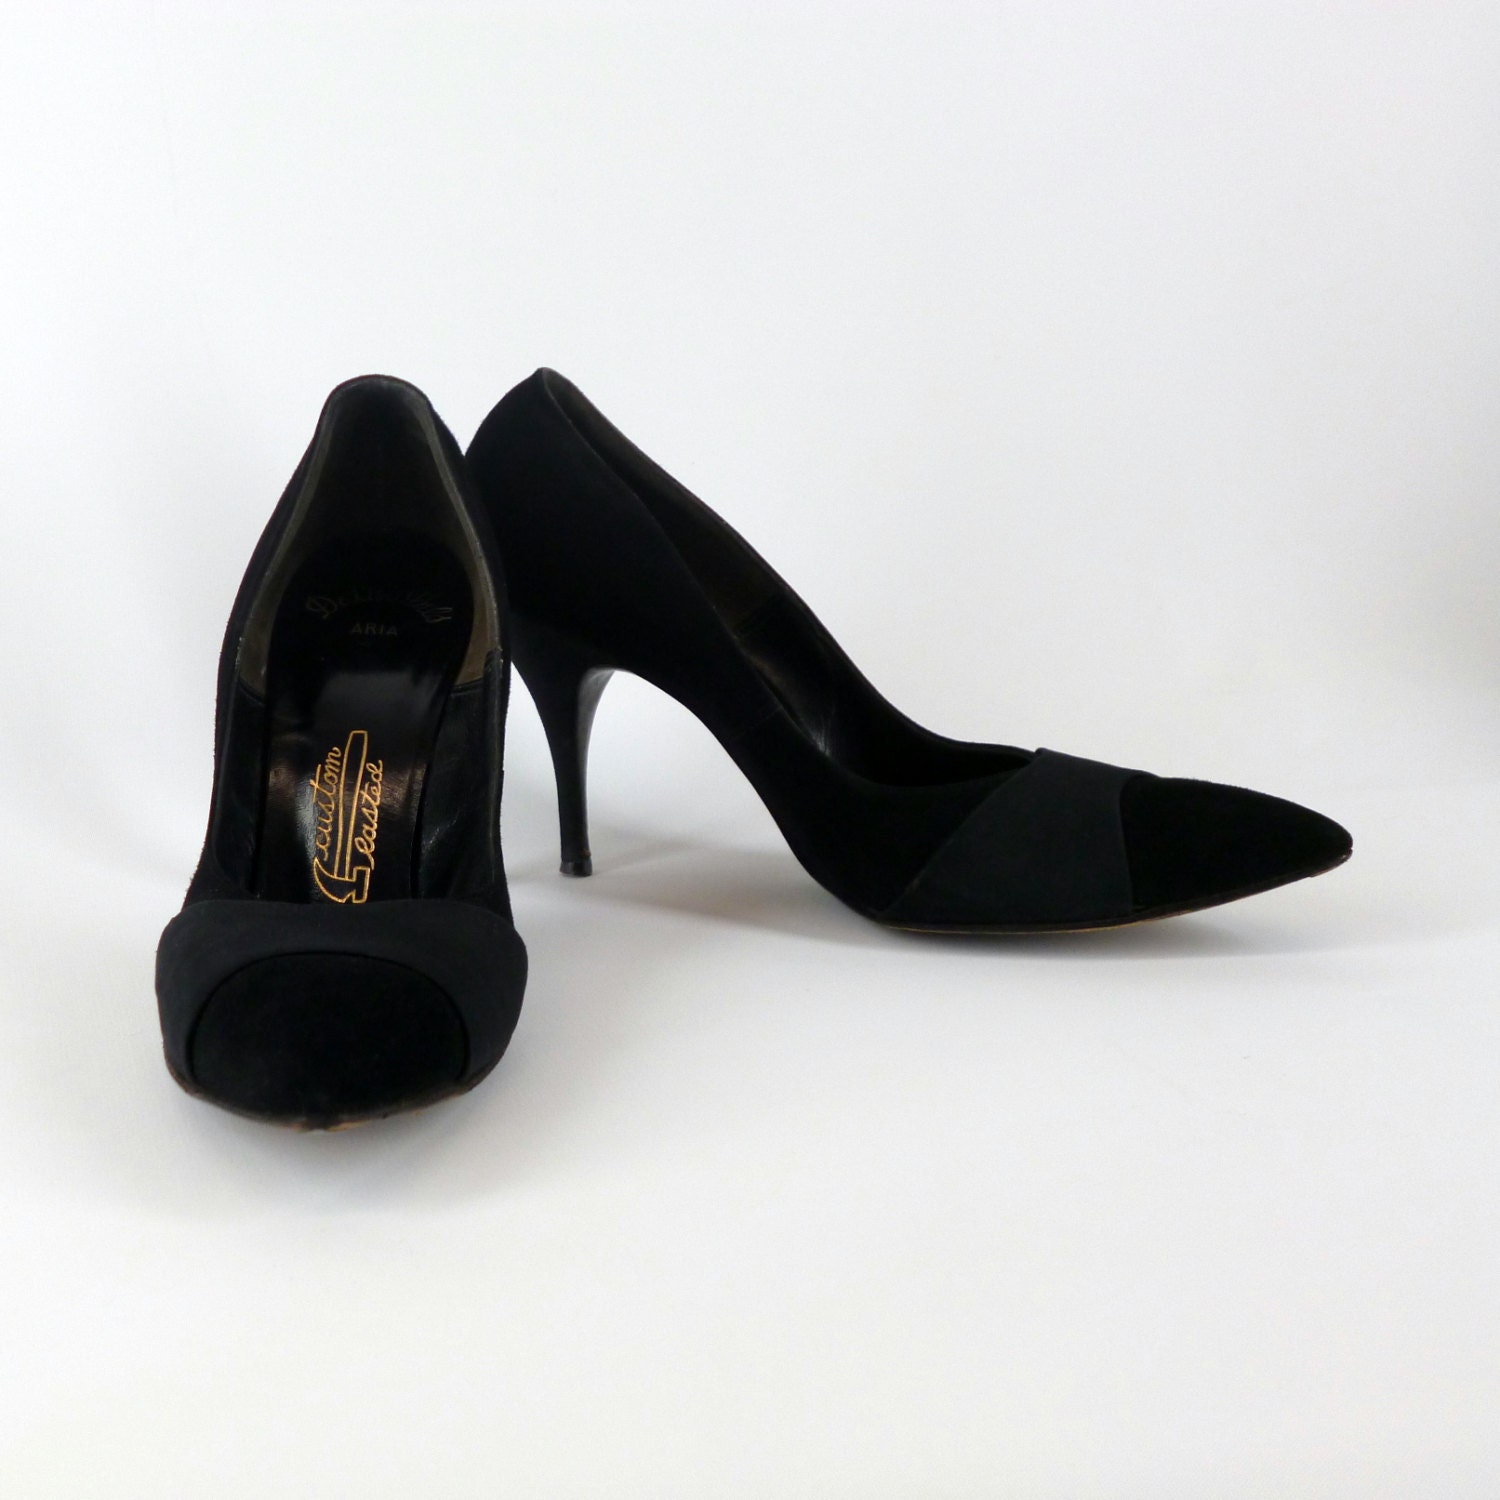 Size 7 1/2 AAA Black Suede Stiletto Shoes Vintage 1960-1970 4 inch ...